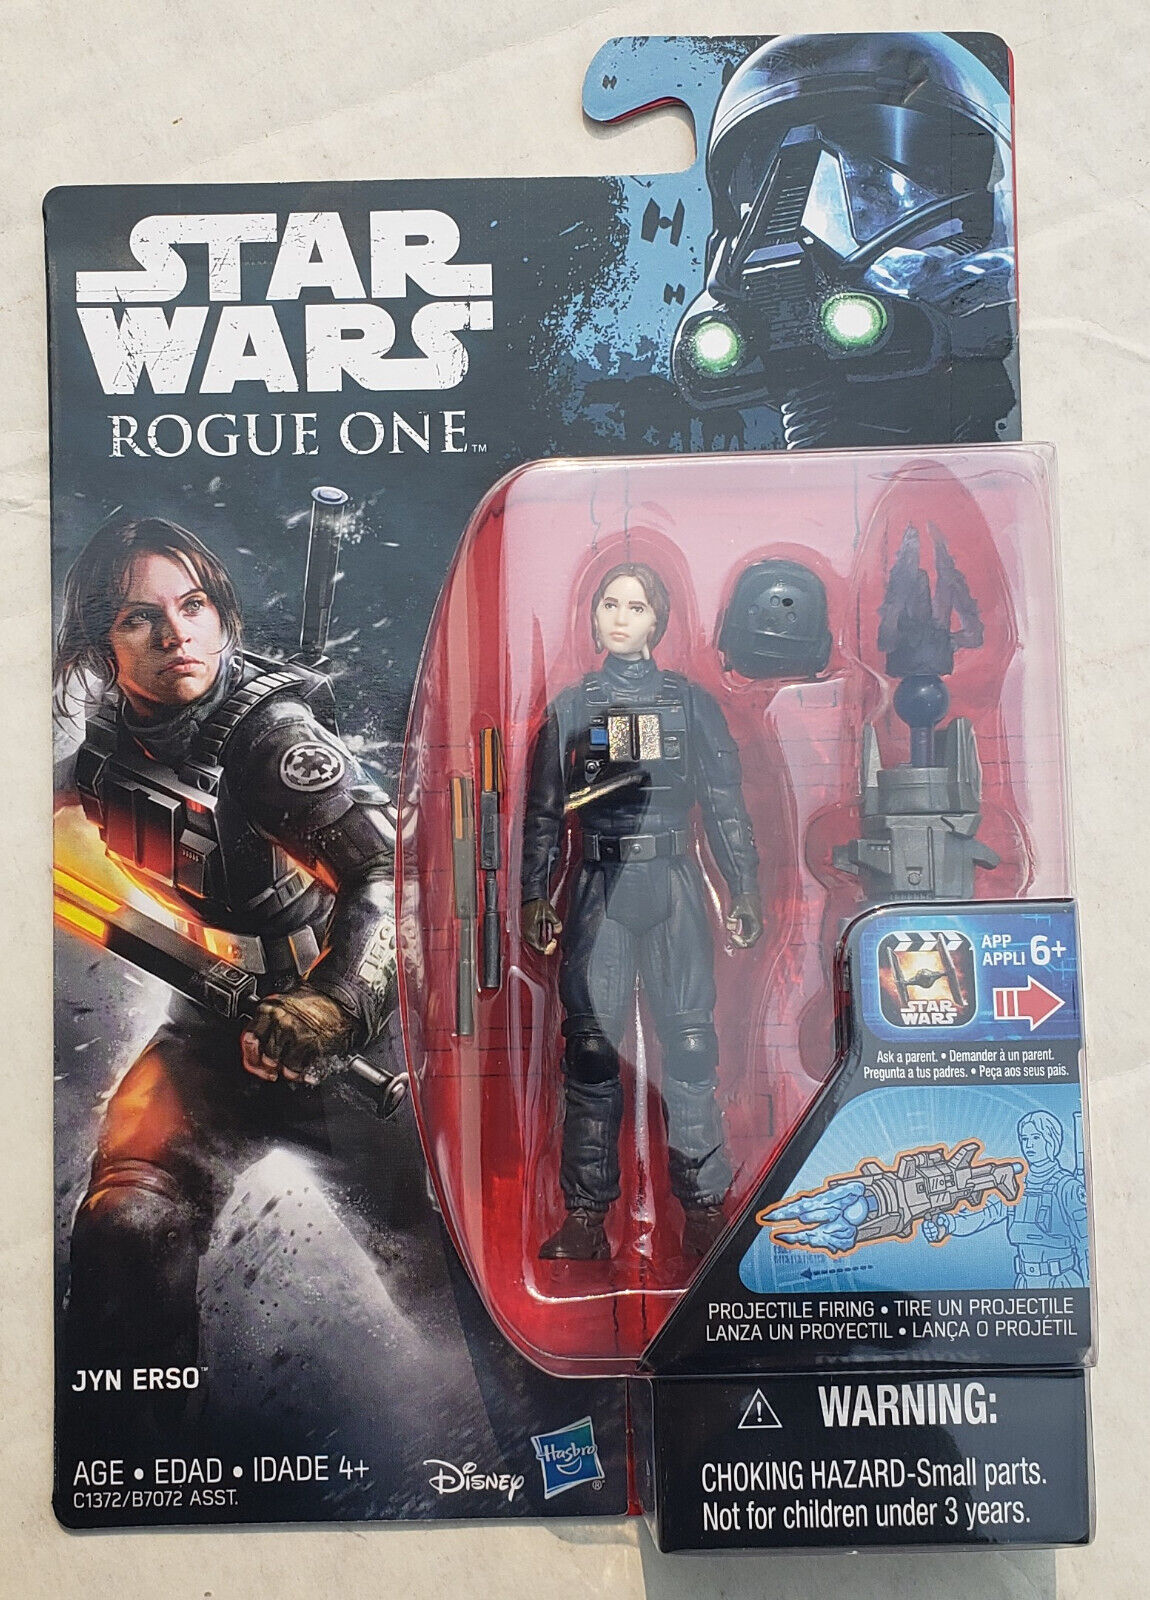 Star Wars Jyn Erso Ground Crew Disguise Rogue One 3.75" Figure Hasbro 2016 New